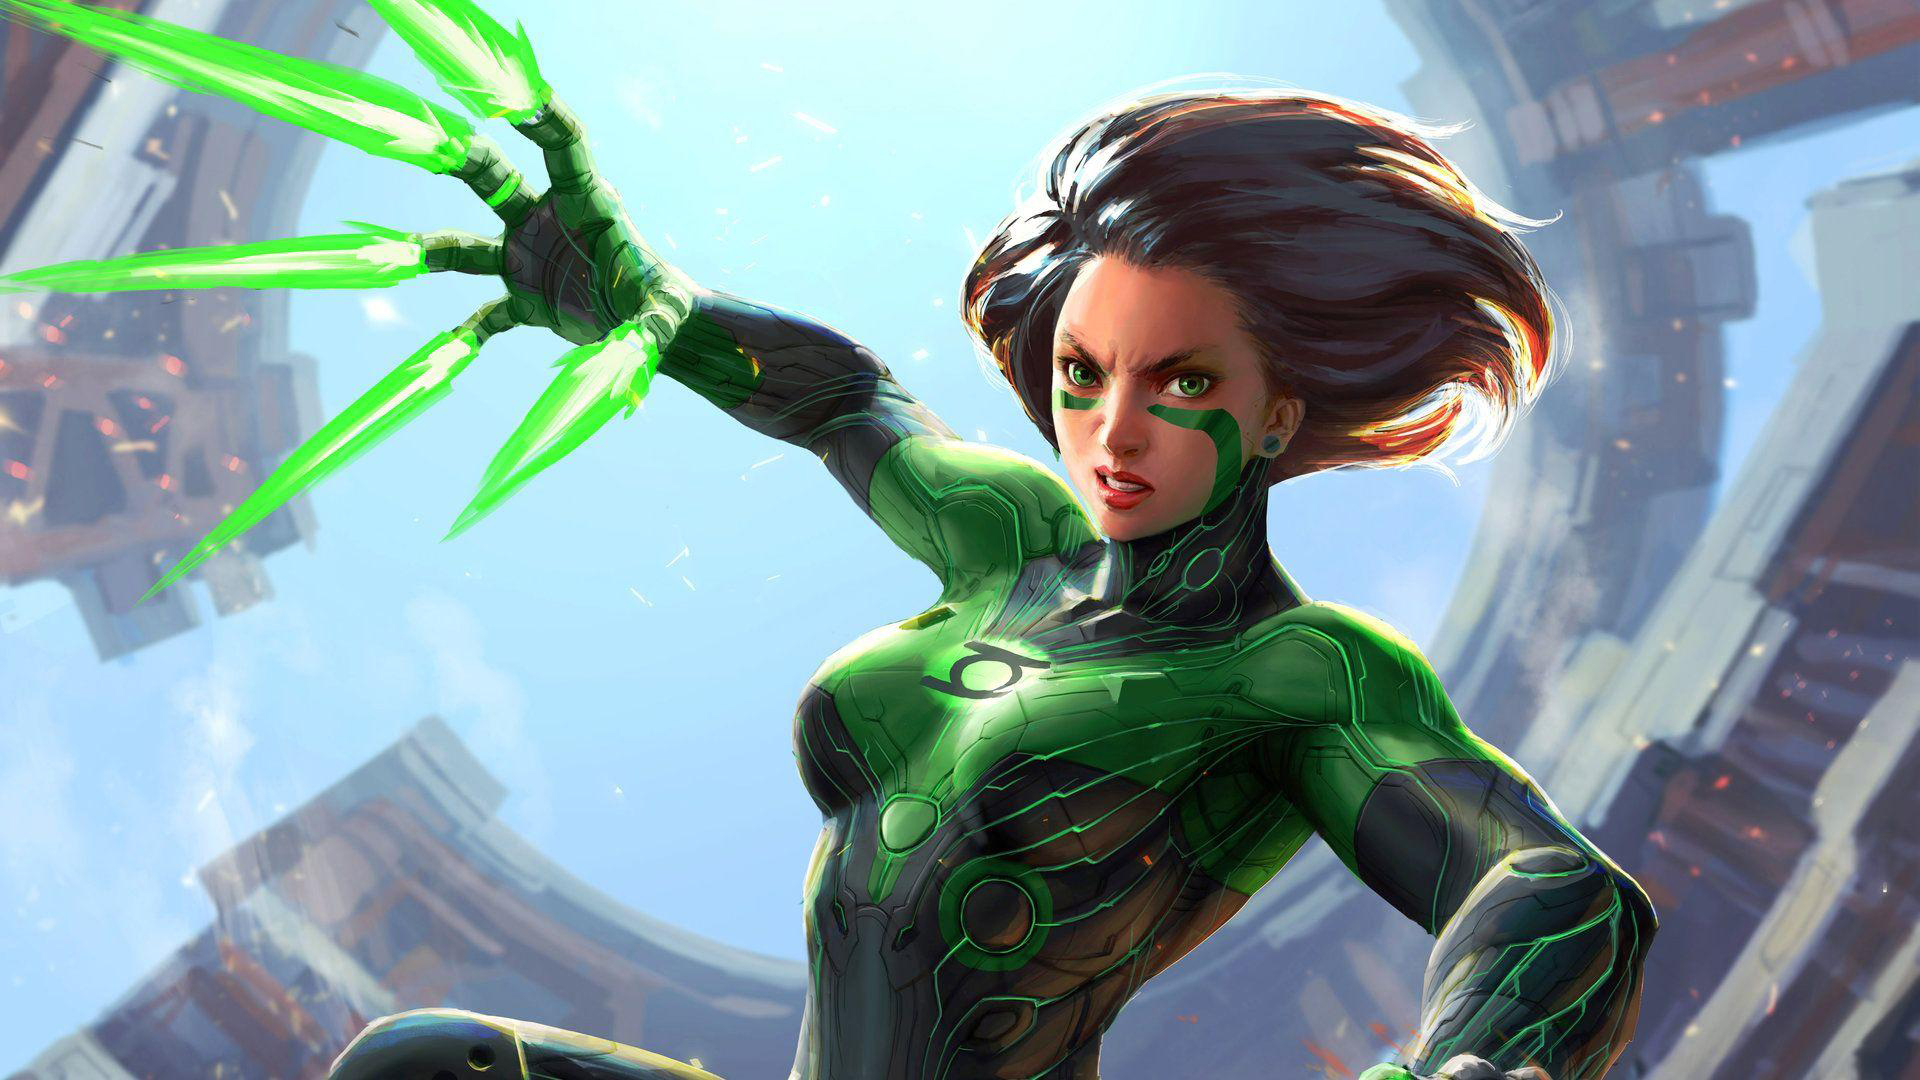 Alita battle angel alita with green fire on fingers around buildings with Wallpaper of blue sky 2K movies